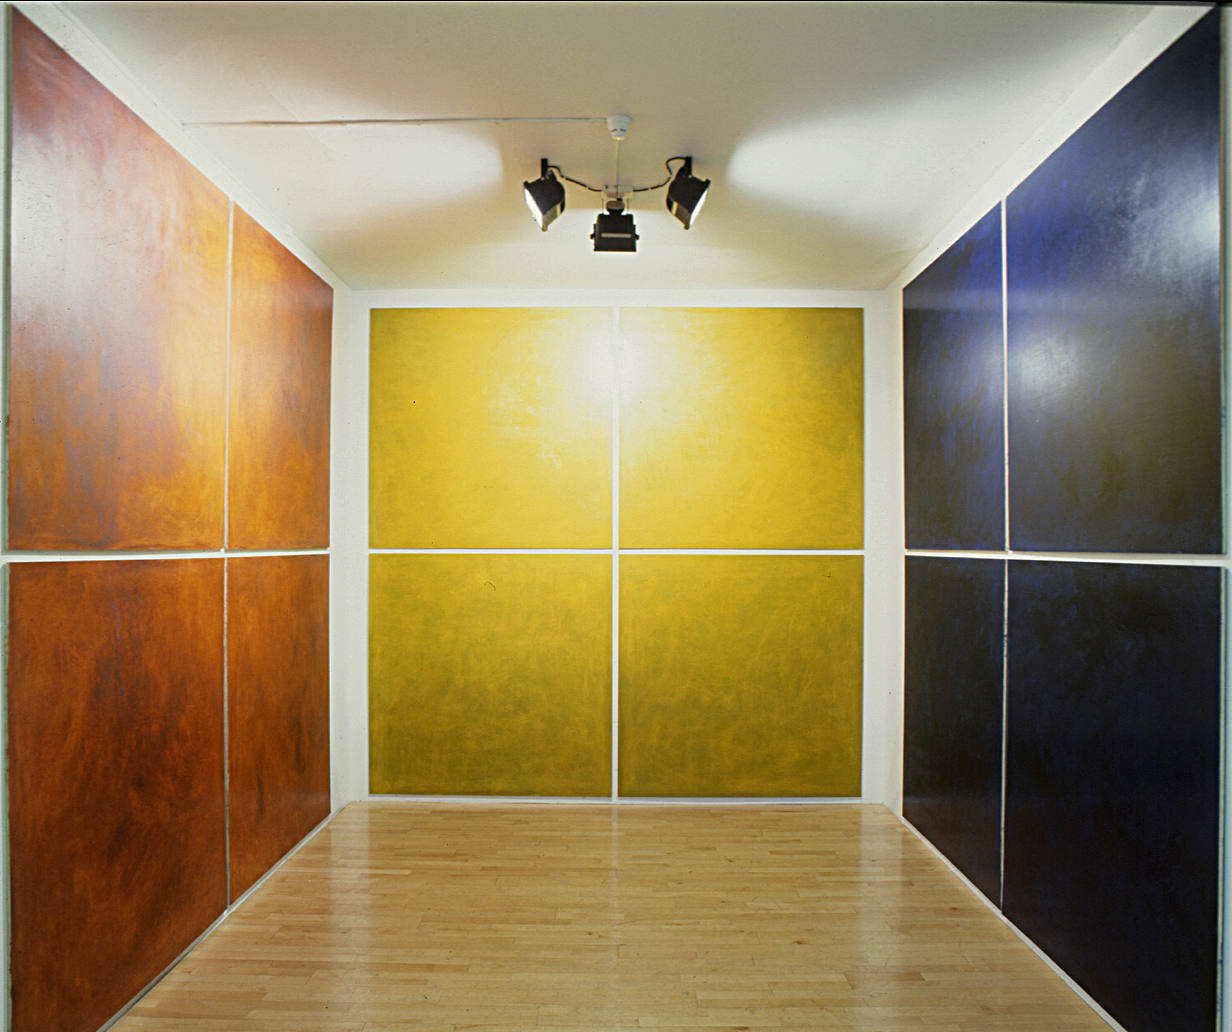  Installation view project room Galleri Riis Oslo.  Ludo . 1993. Oil and pigment on birch wood.&nbsp; 